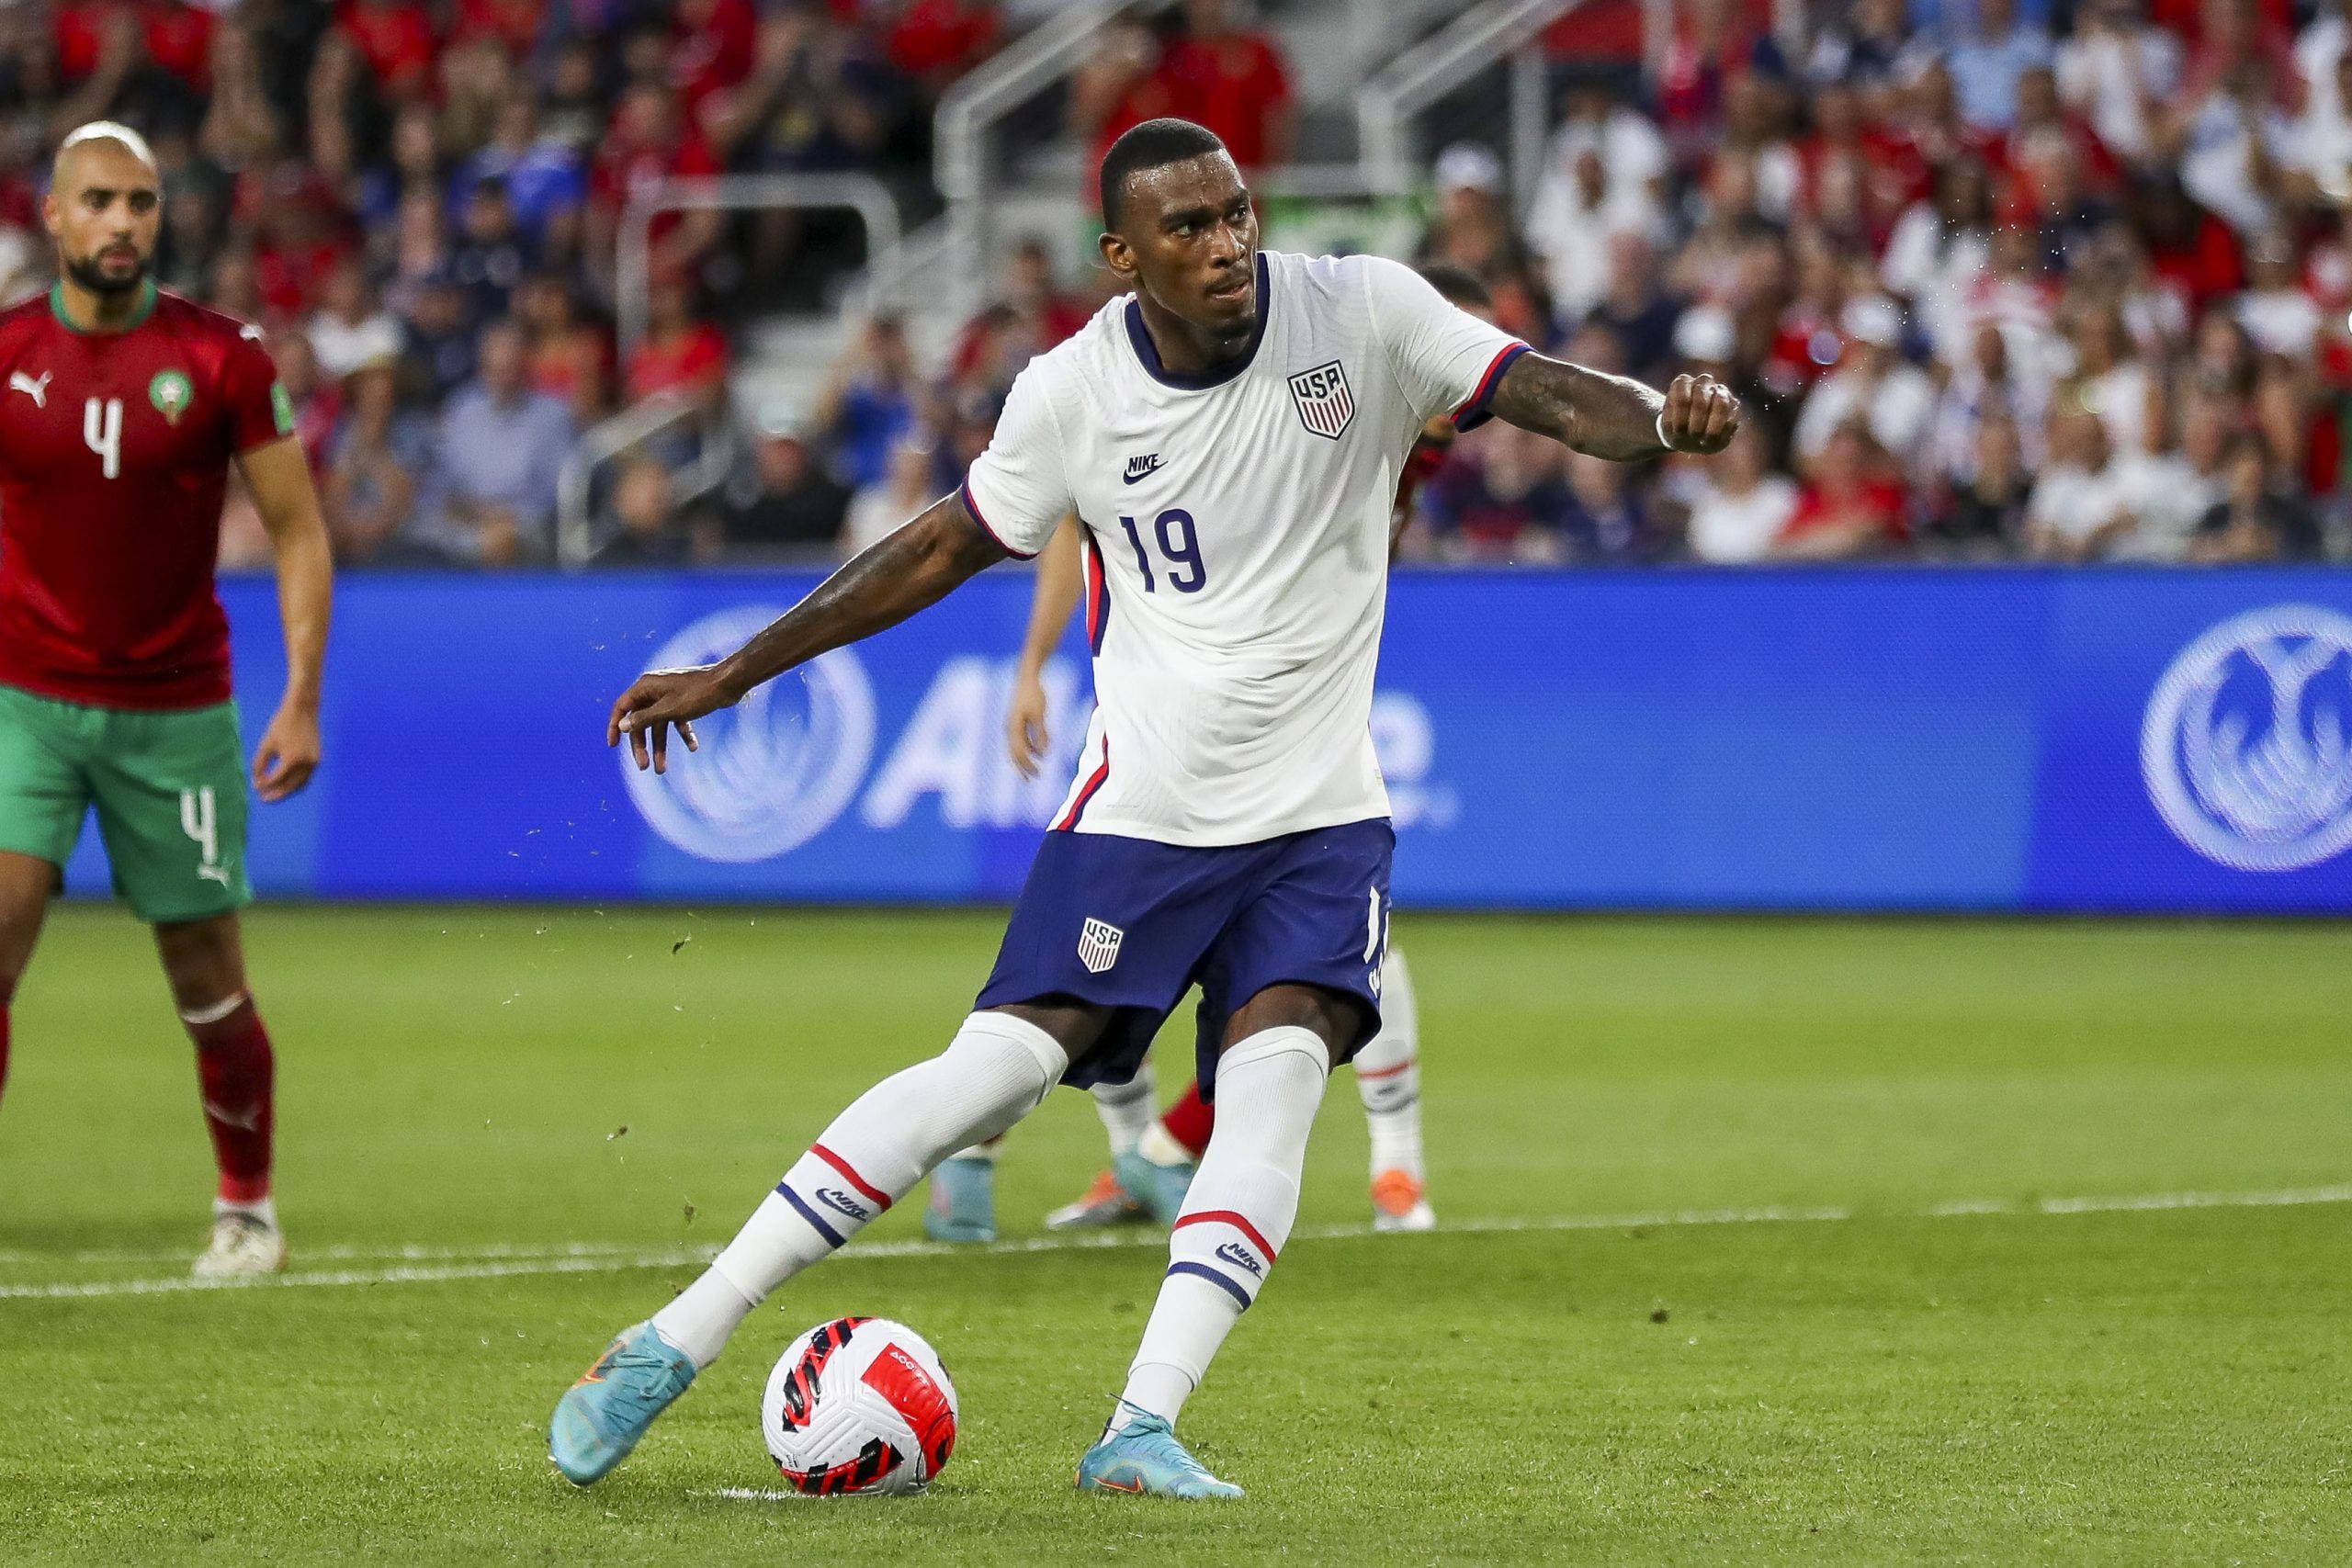 Jun 1, 2022; Cincinnati, Ohio, USA; the United States forward Haji Wright (19) shoots and scores a goal on a penalty kick against Morocco in the second half during an International friendly soccer match at TQL Stadium. Mandatory Credit: Katie Stratman-USA TODAY Sports